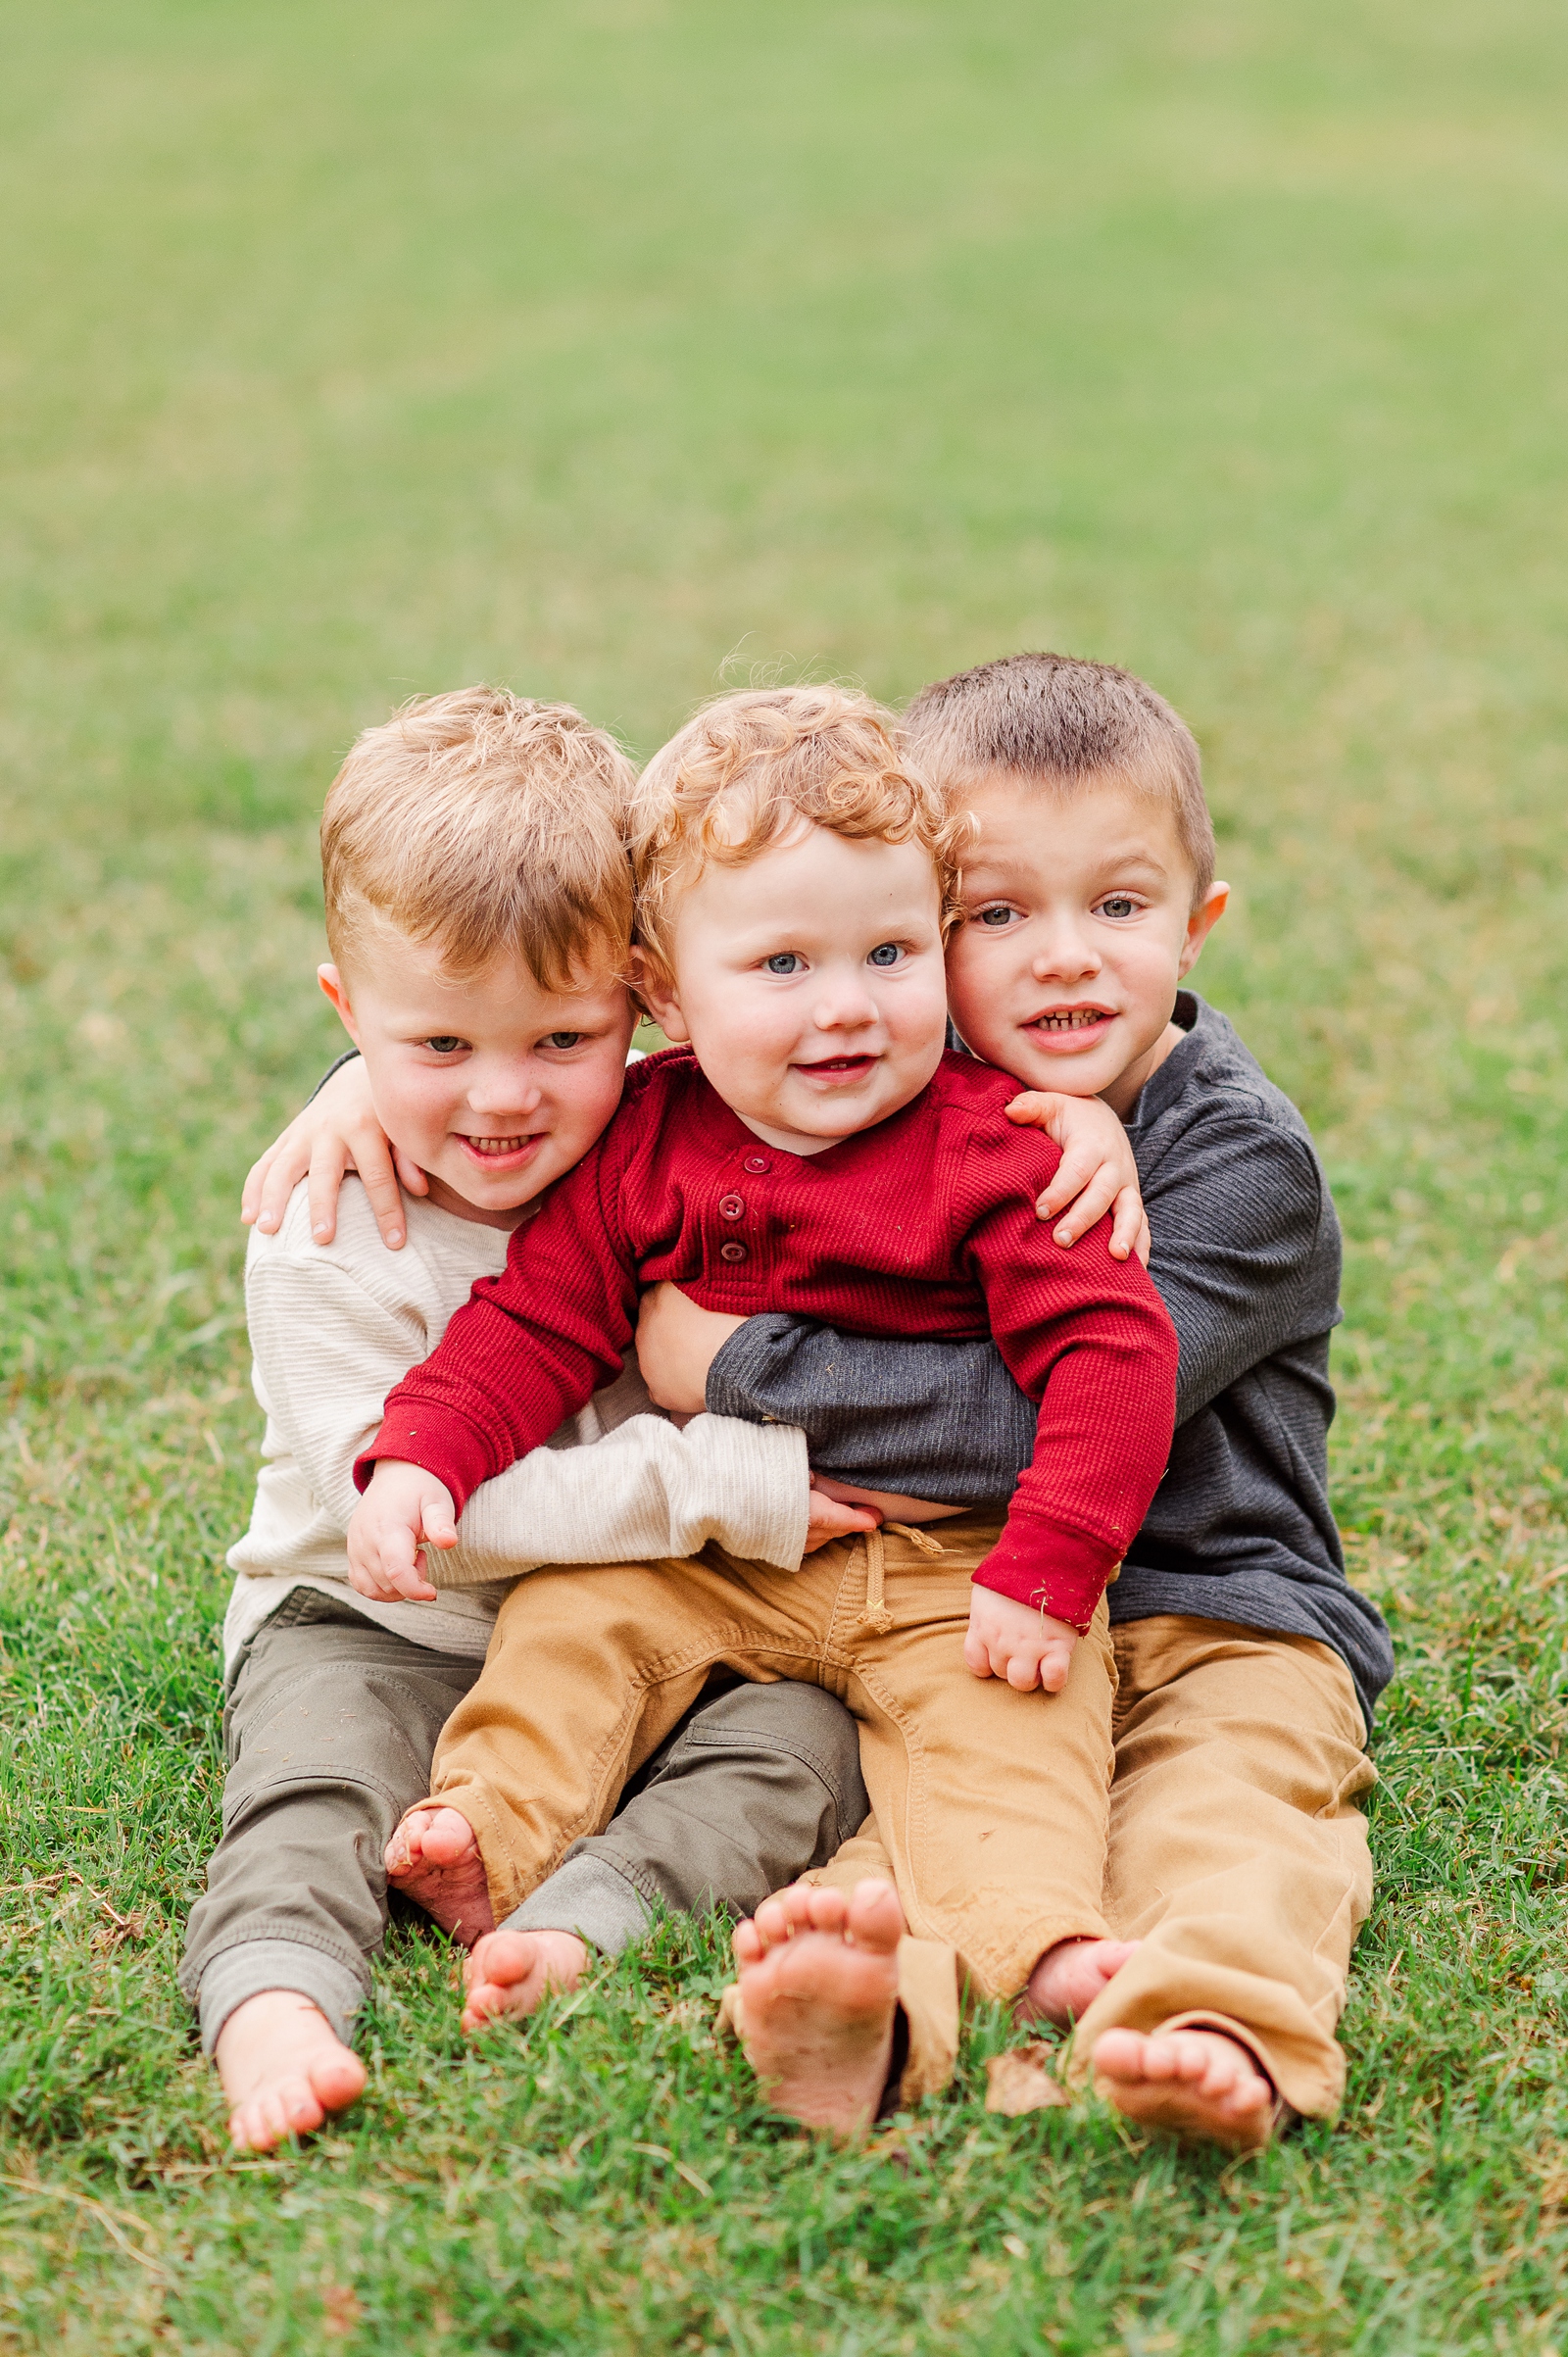 2021 Richmond Fall Family Mini Sessions at Crump Meadow Farm Park with Richmond Family Photographer Kailey Brianne Photography.